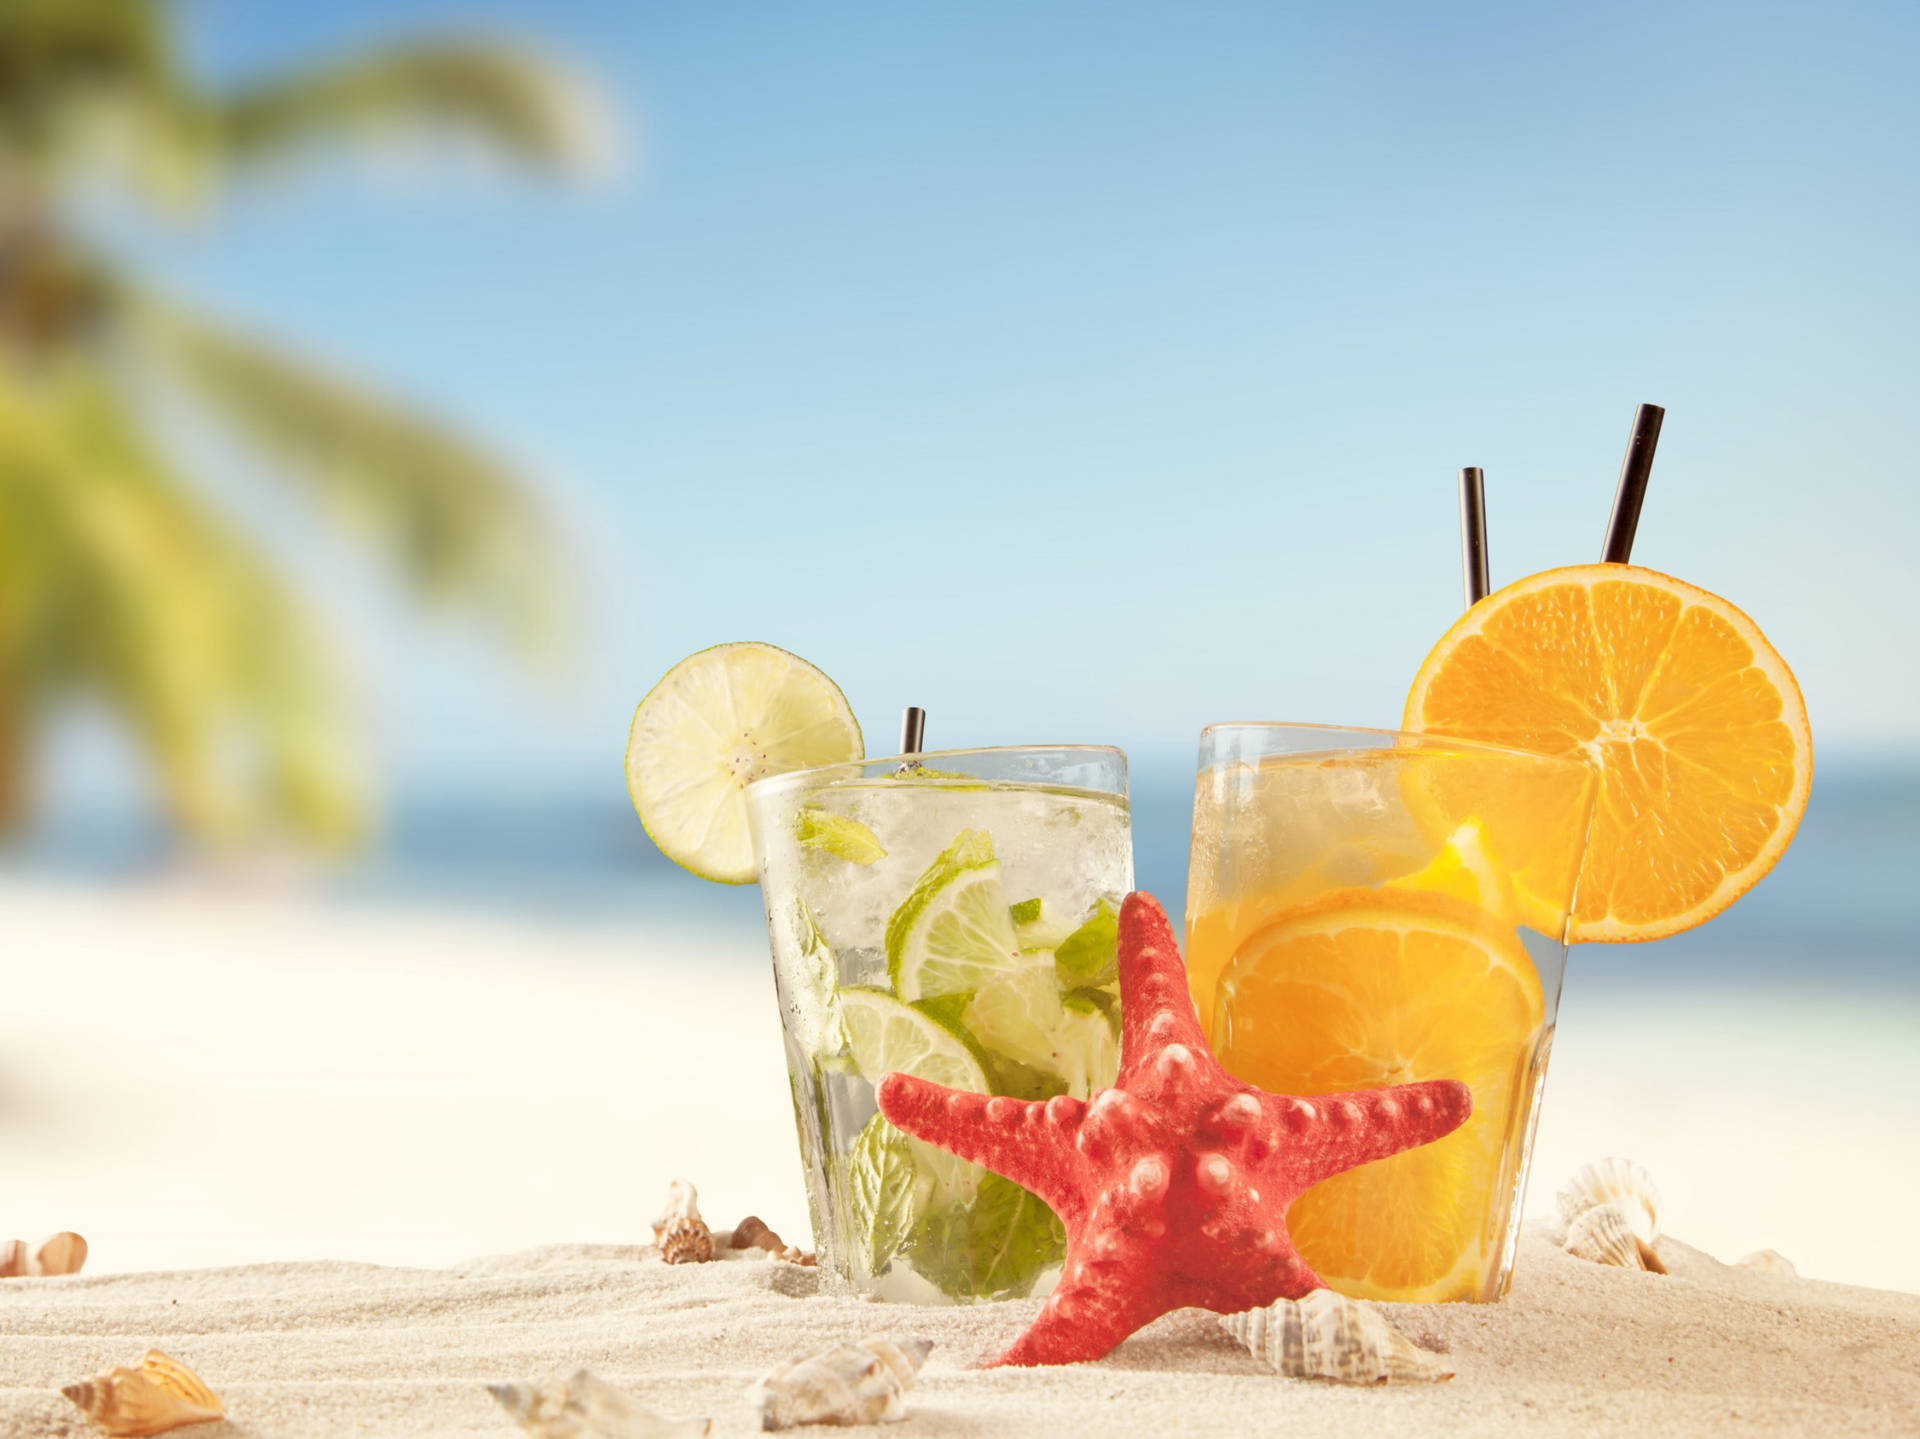 Download Lime And Lemon Tropical Drink Wallpaper | Wallpapers.com